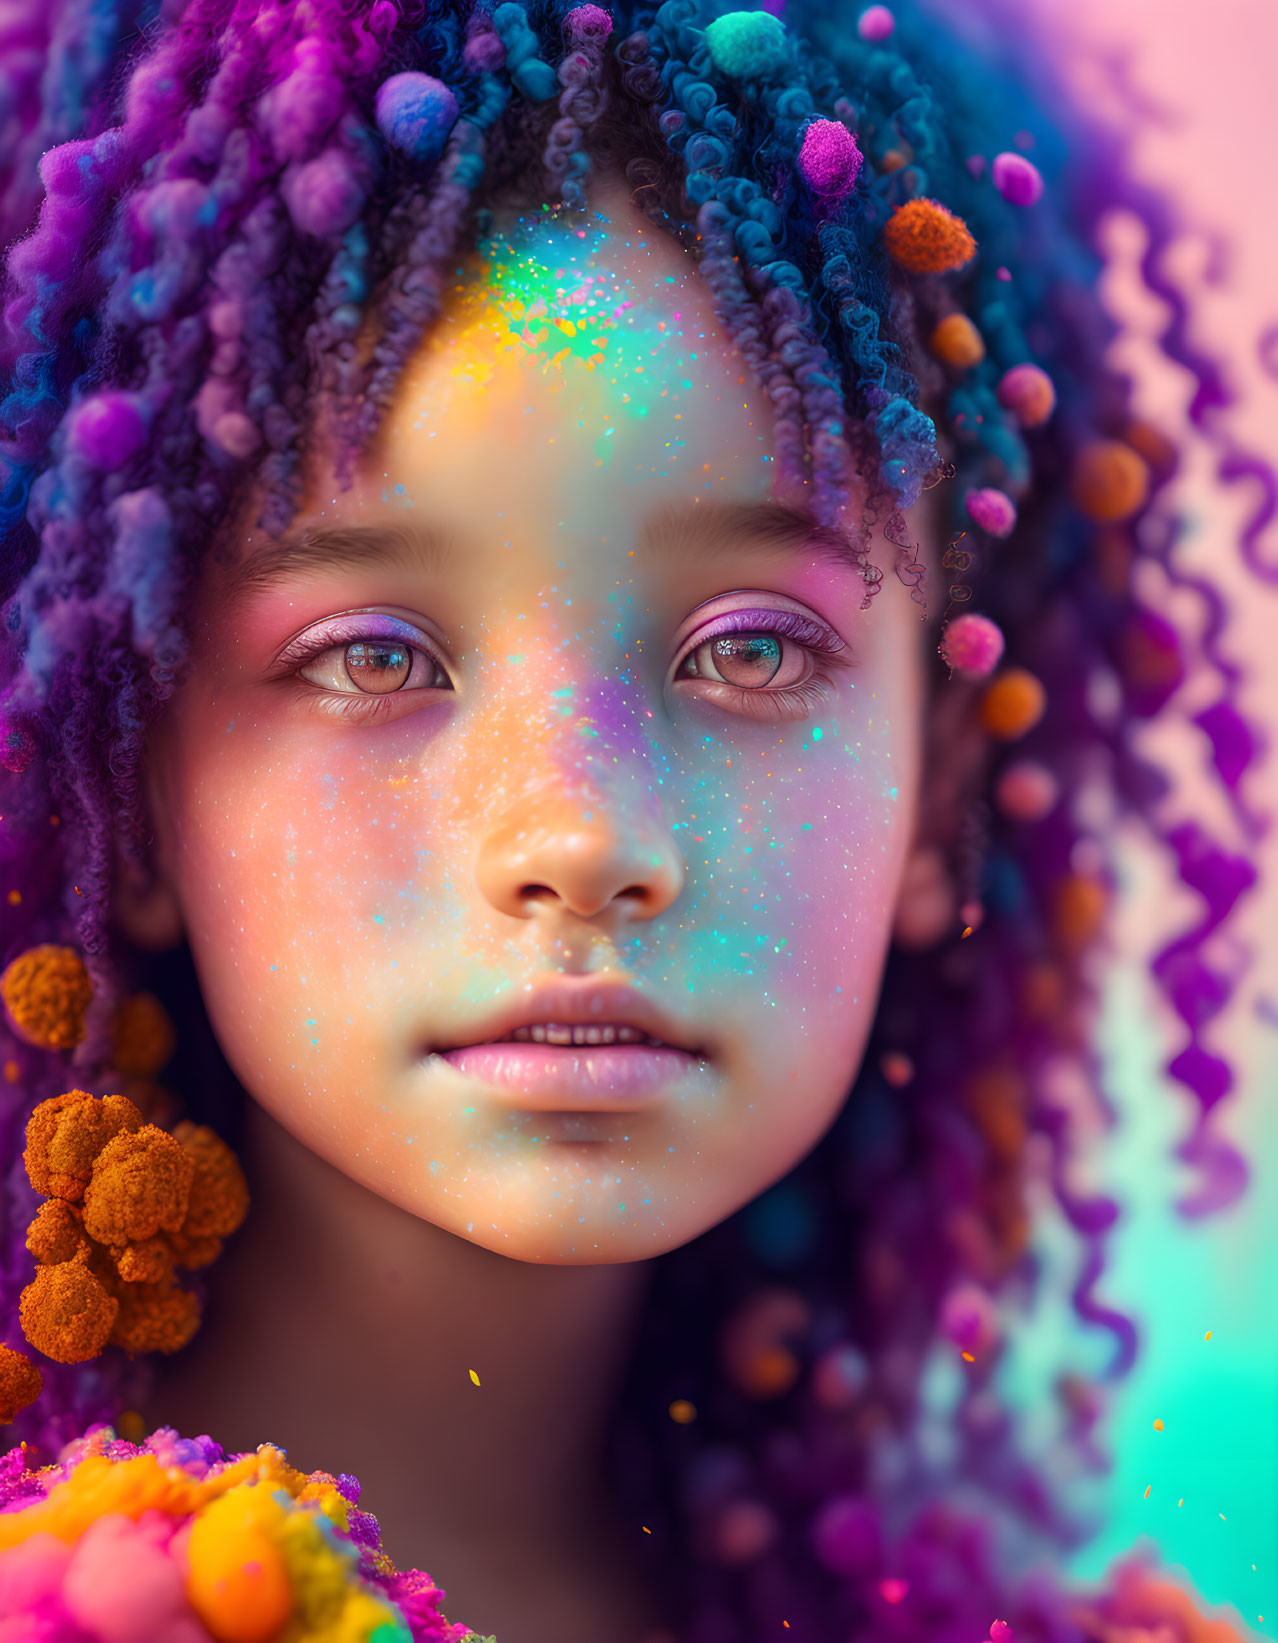 Colorful curly hair child with pom-poms and glitter on face against pinkish-blue backdrop